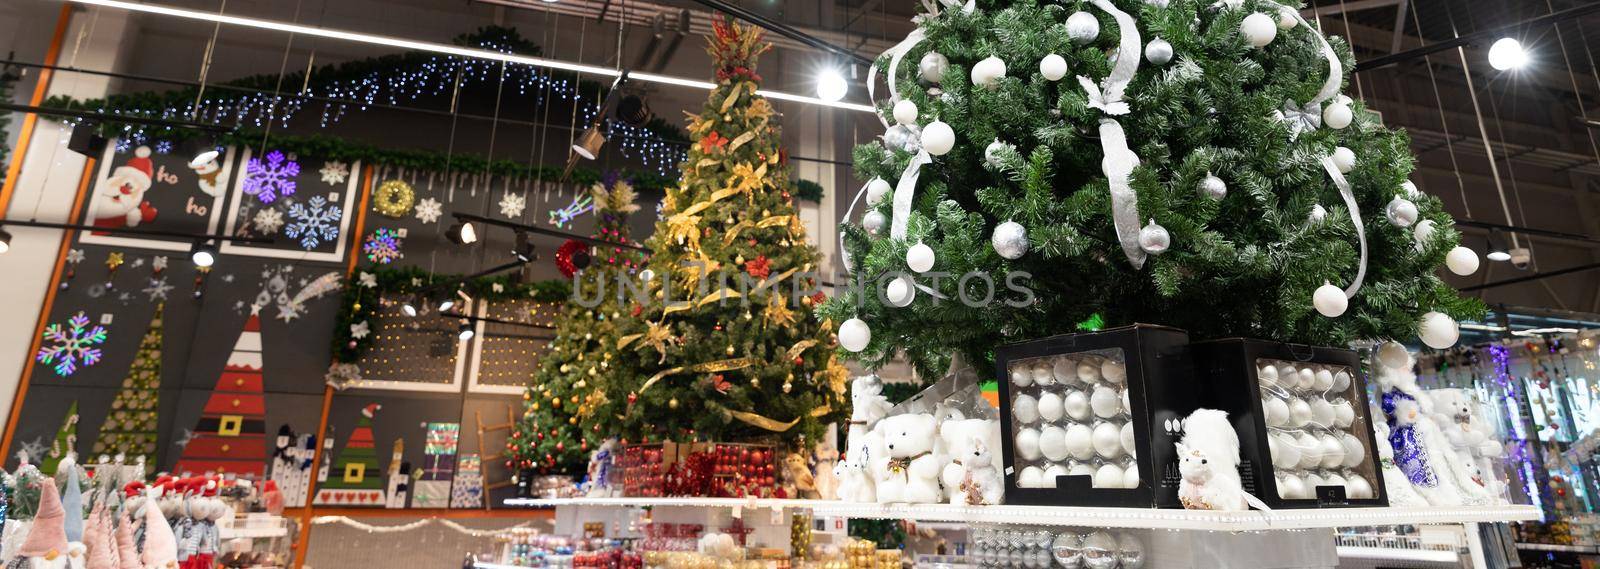 Minsk, Belarus - Nov 29, 2021: New Year's goods in the hypermarket, Christmas tree and Christmas decorations, Christmas goods by TRMK